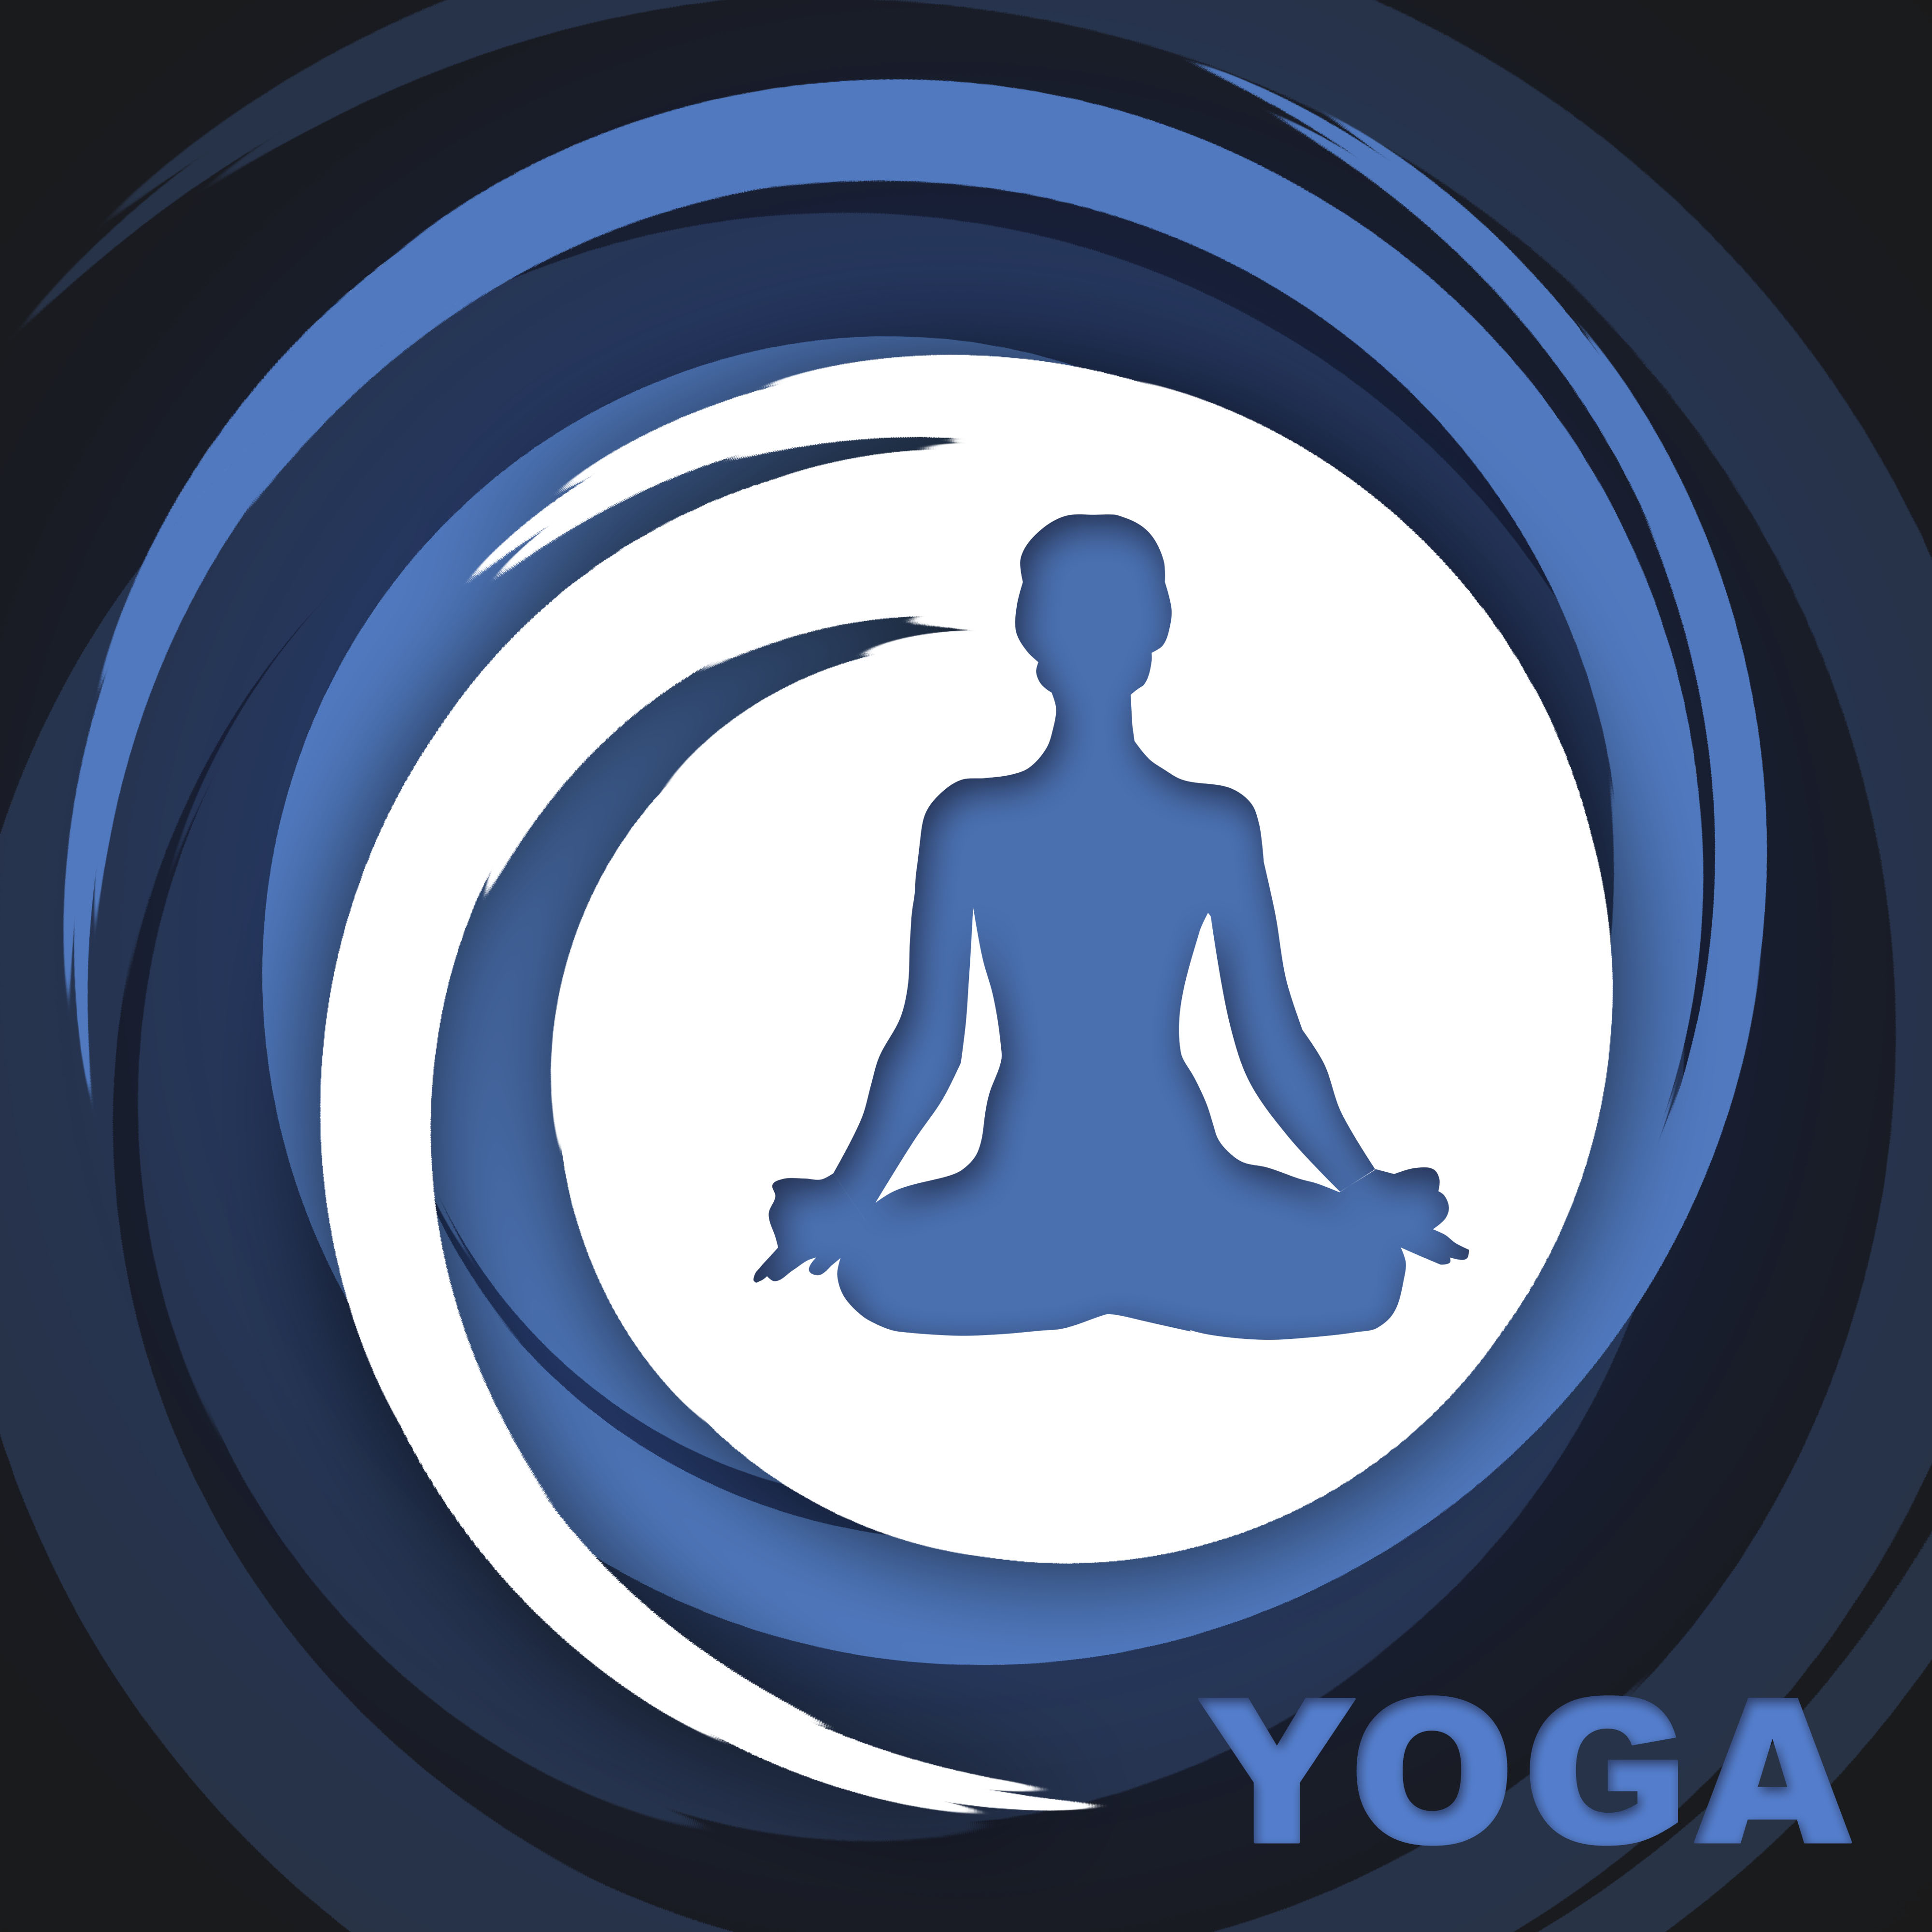 Yoga – Meditation, Pure Relaxation, Lounge, Ambient Sounds, Serenity Yoga, Lotus Position, Inner Energy